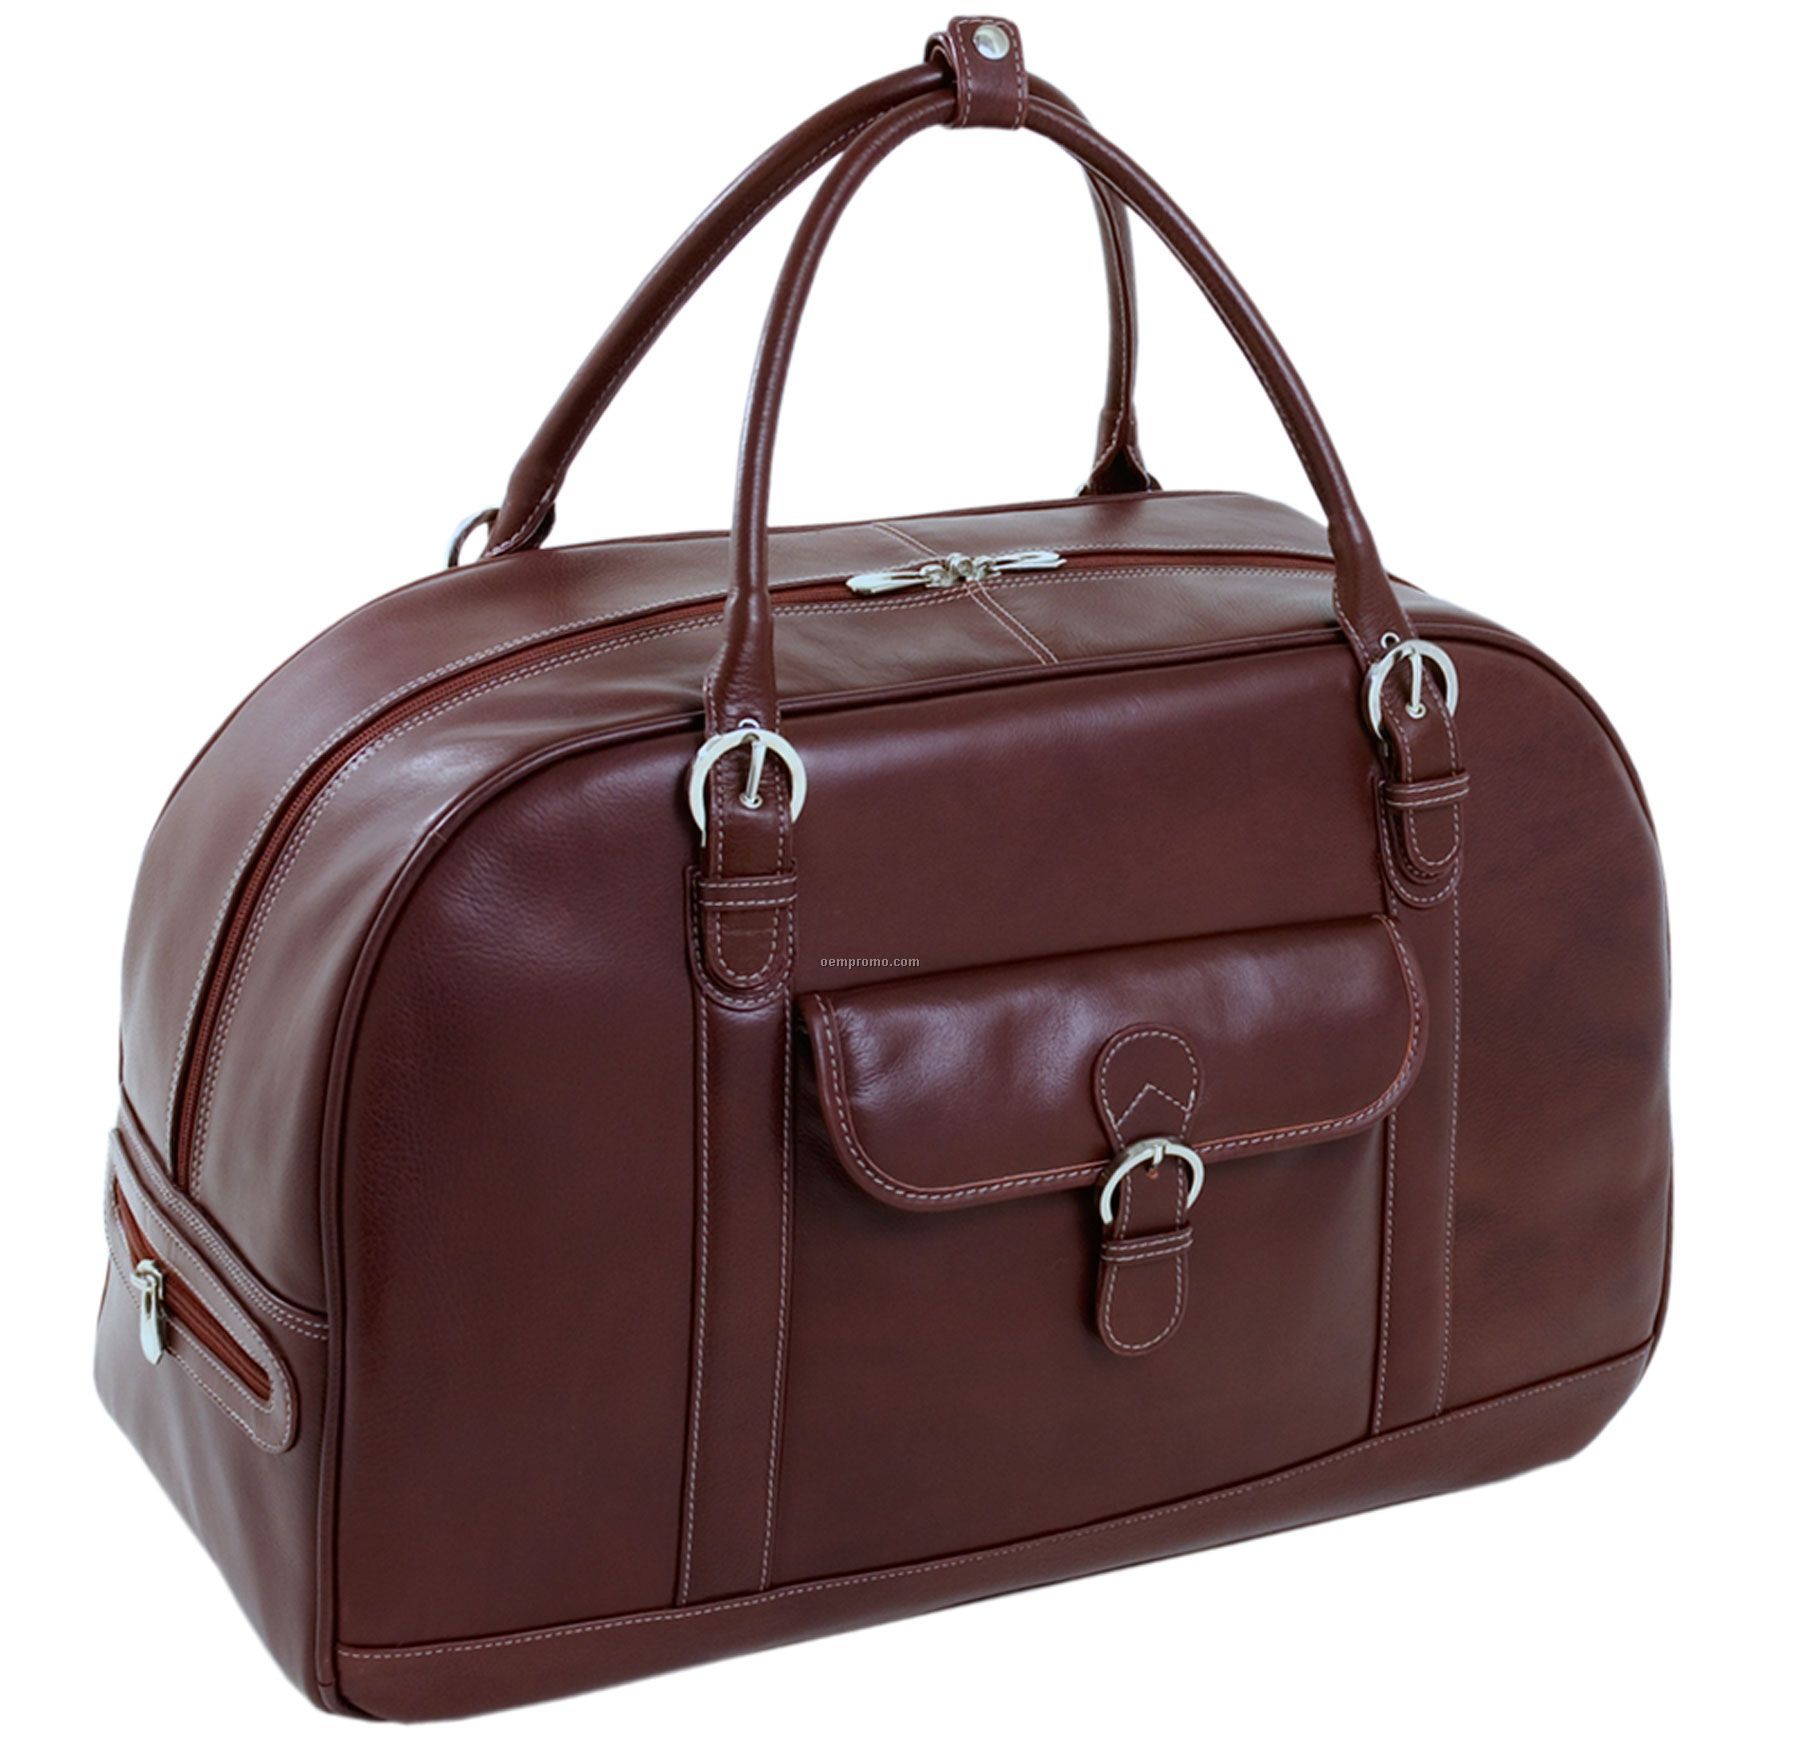 Stalla Leather Duffel Bag - Cherry Red